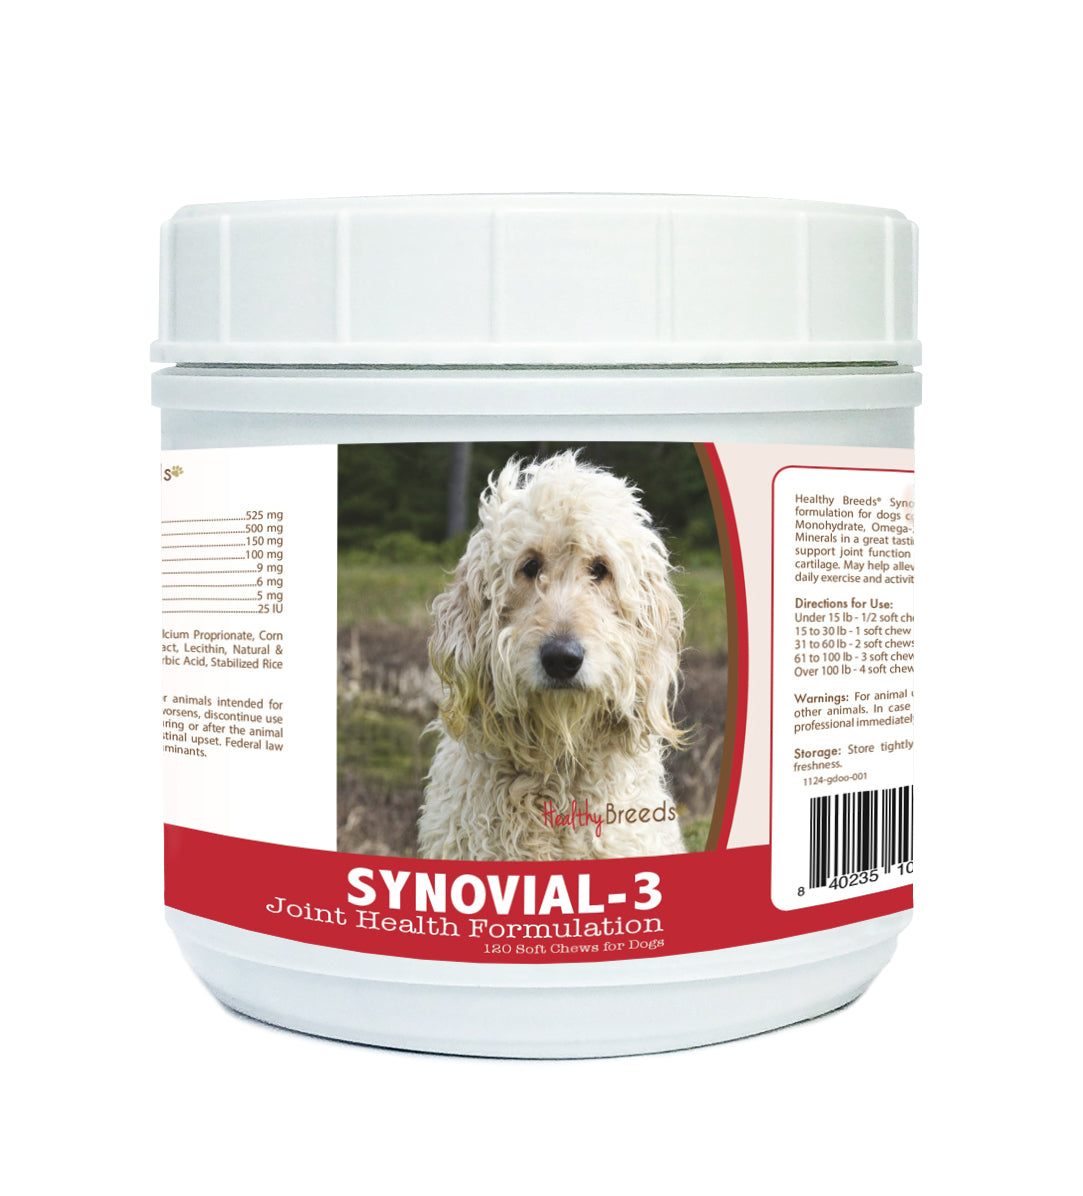 Goldendoodle Synovial-3 Joint Health Formulation Soft Chews 120 Count